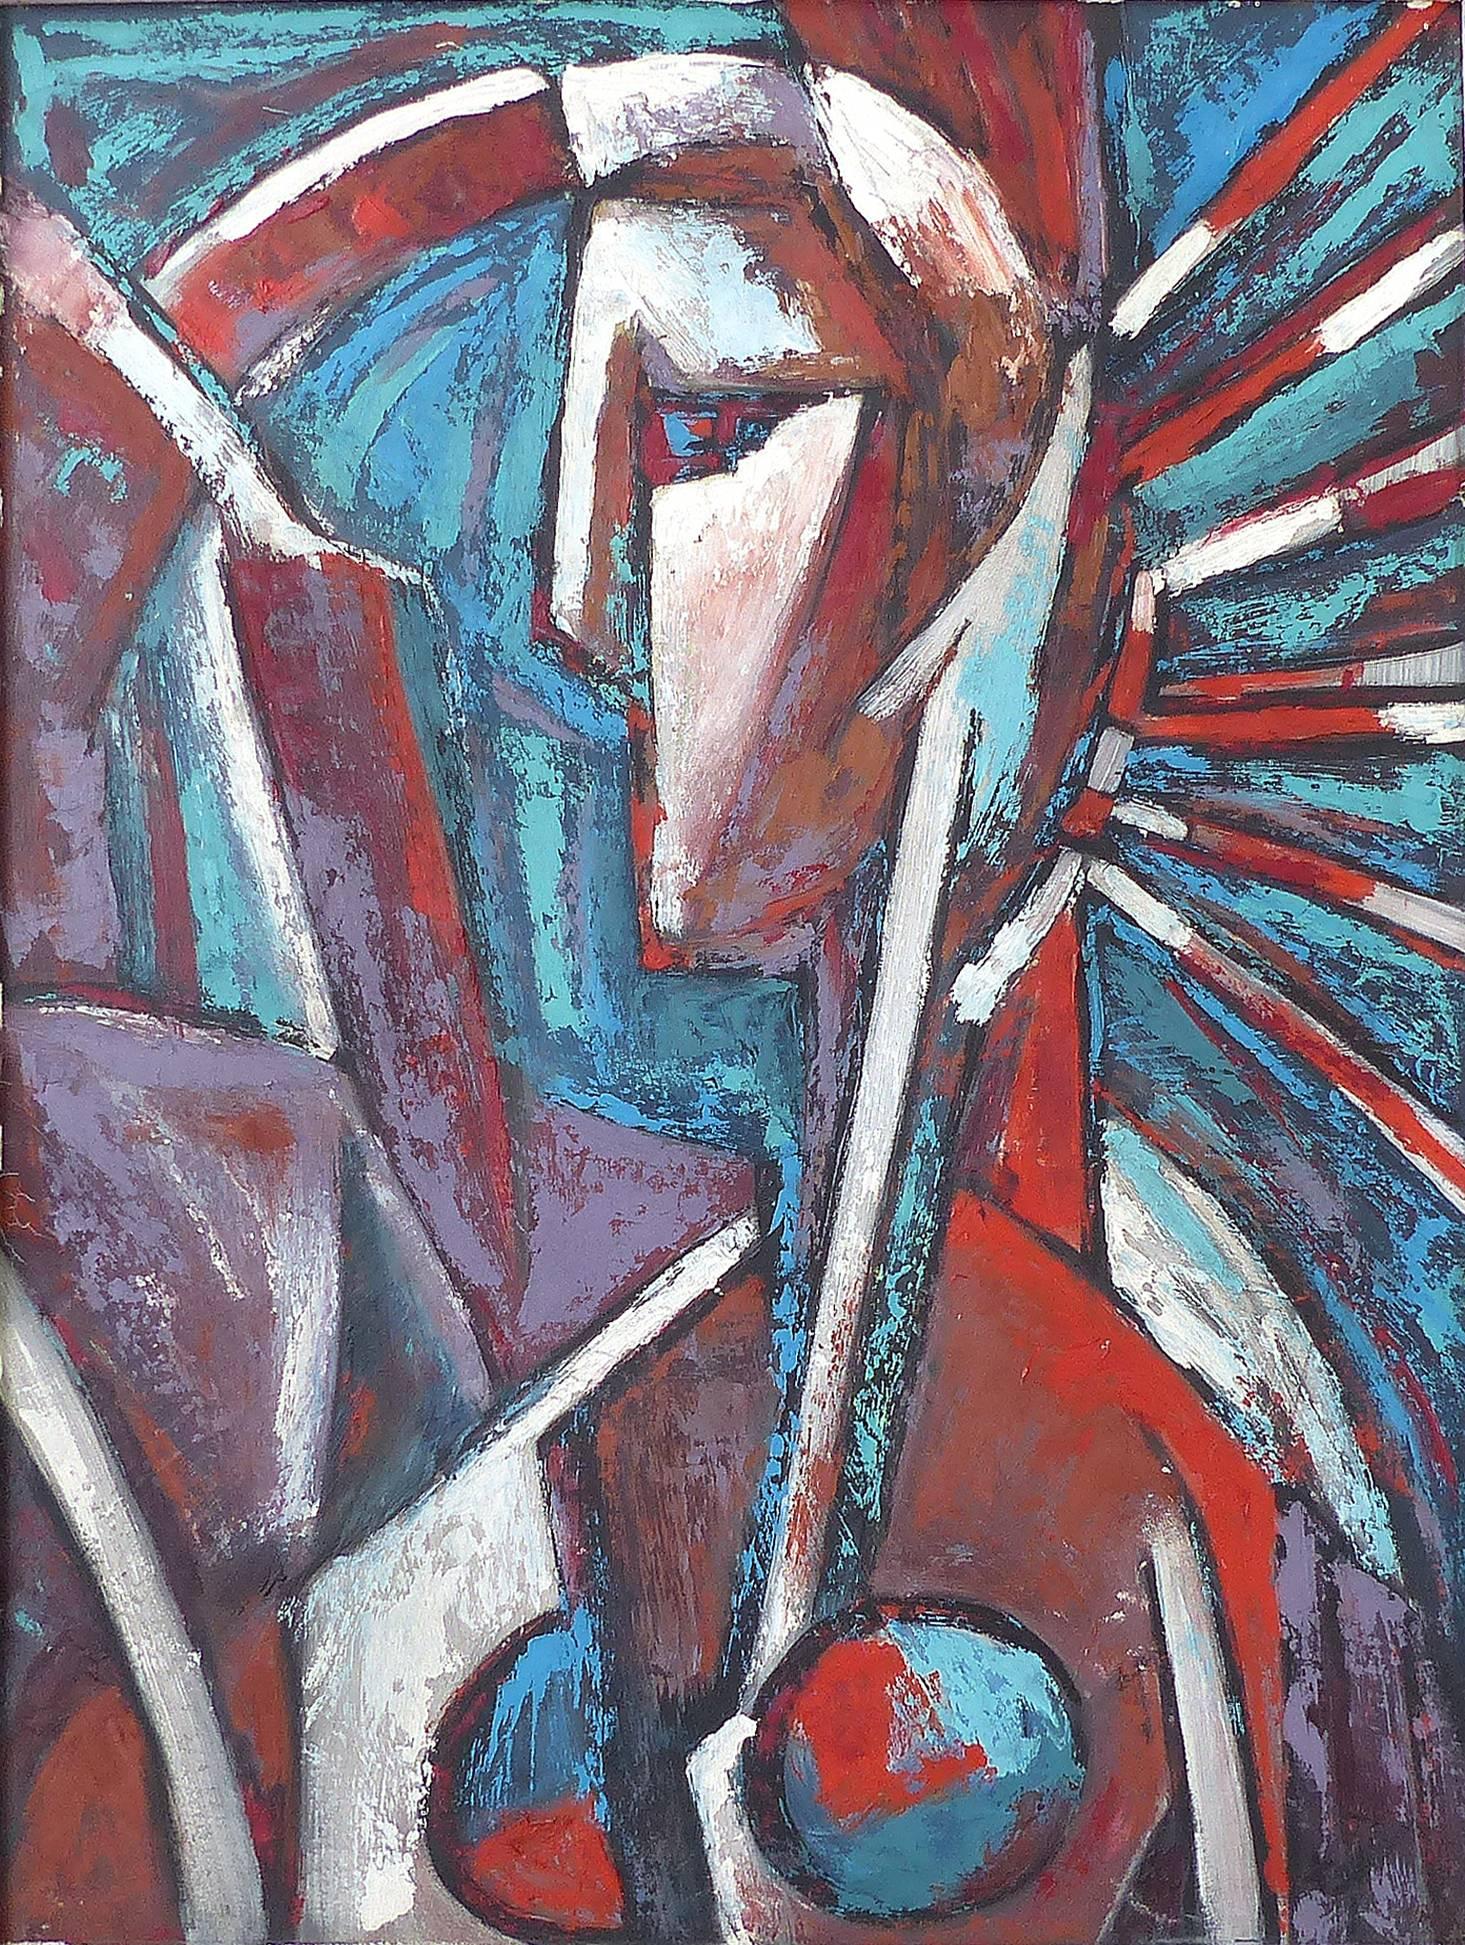 Mid-Century Modern Abstract Cubist Portrait

Offered for sale is a bold Mid-Century Modern abstract cubist portrait created in red and blue hues with an intentionally distressed style. The portrait is painted in oil on board and is displayed in the